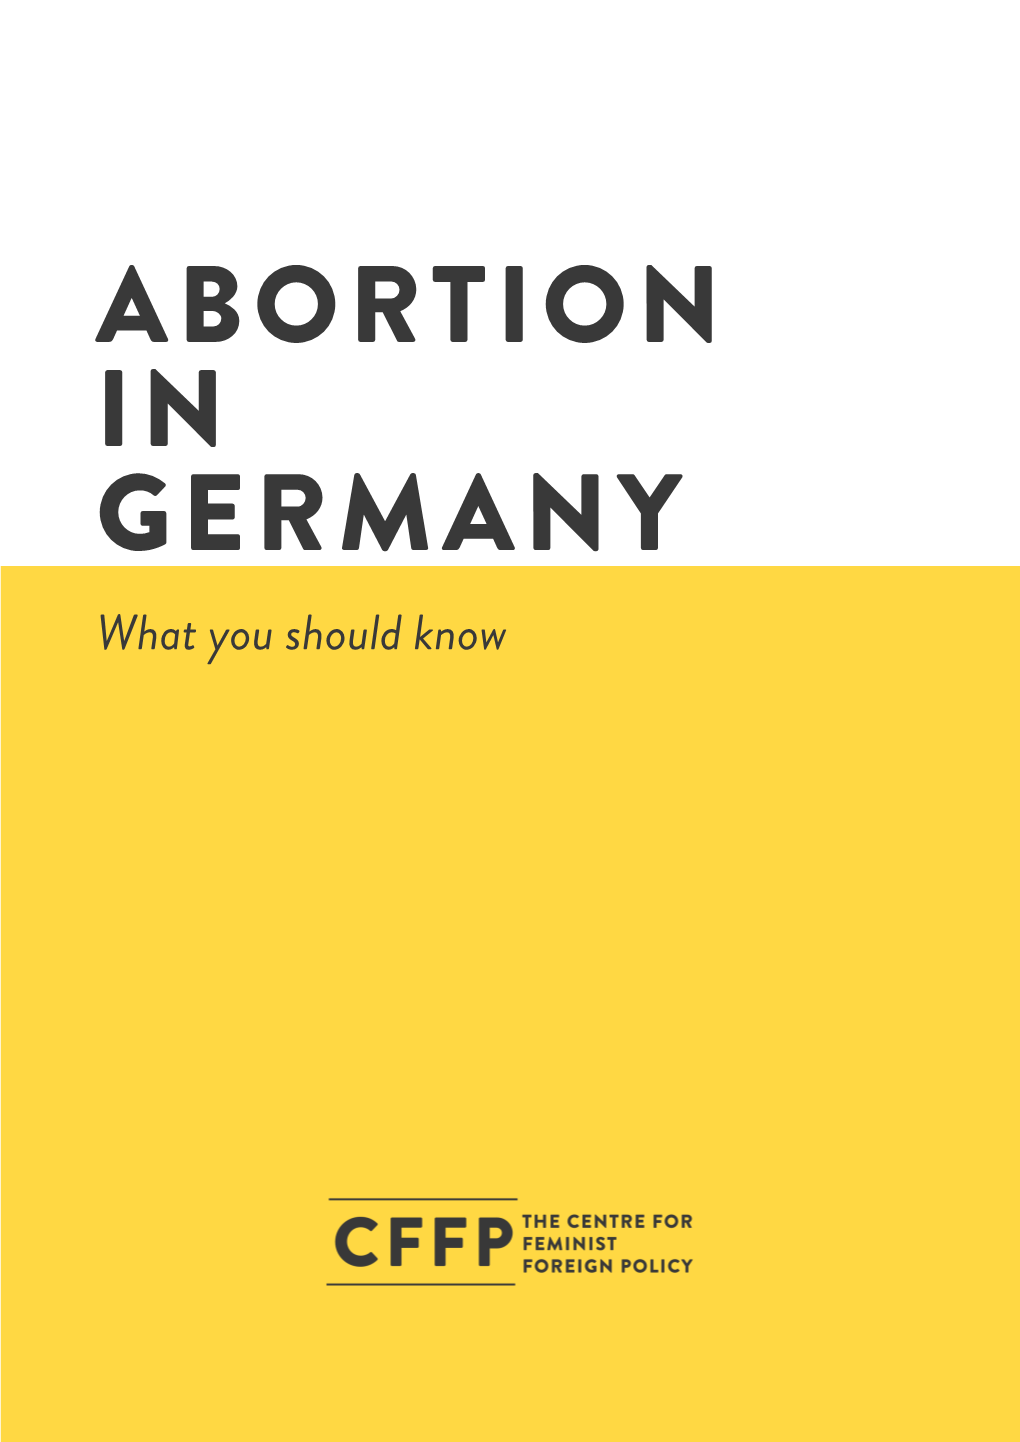 Abortion in Germany Information